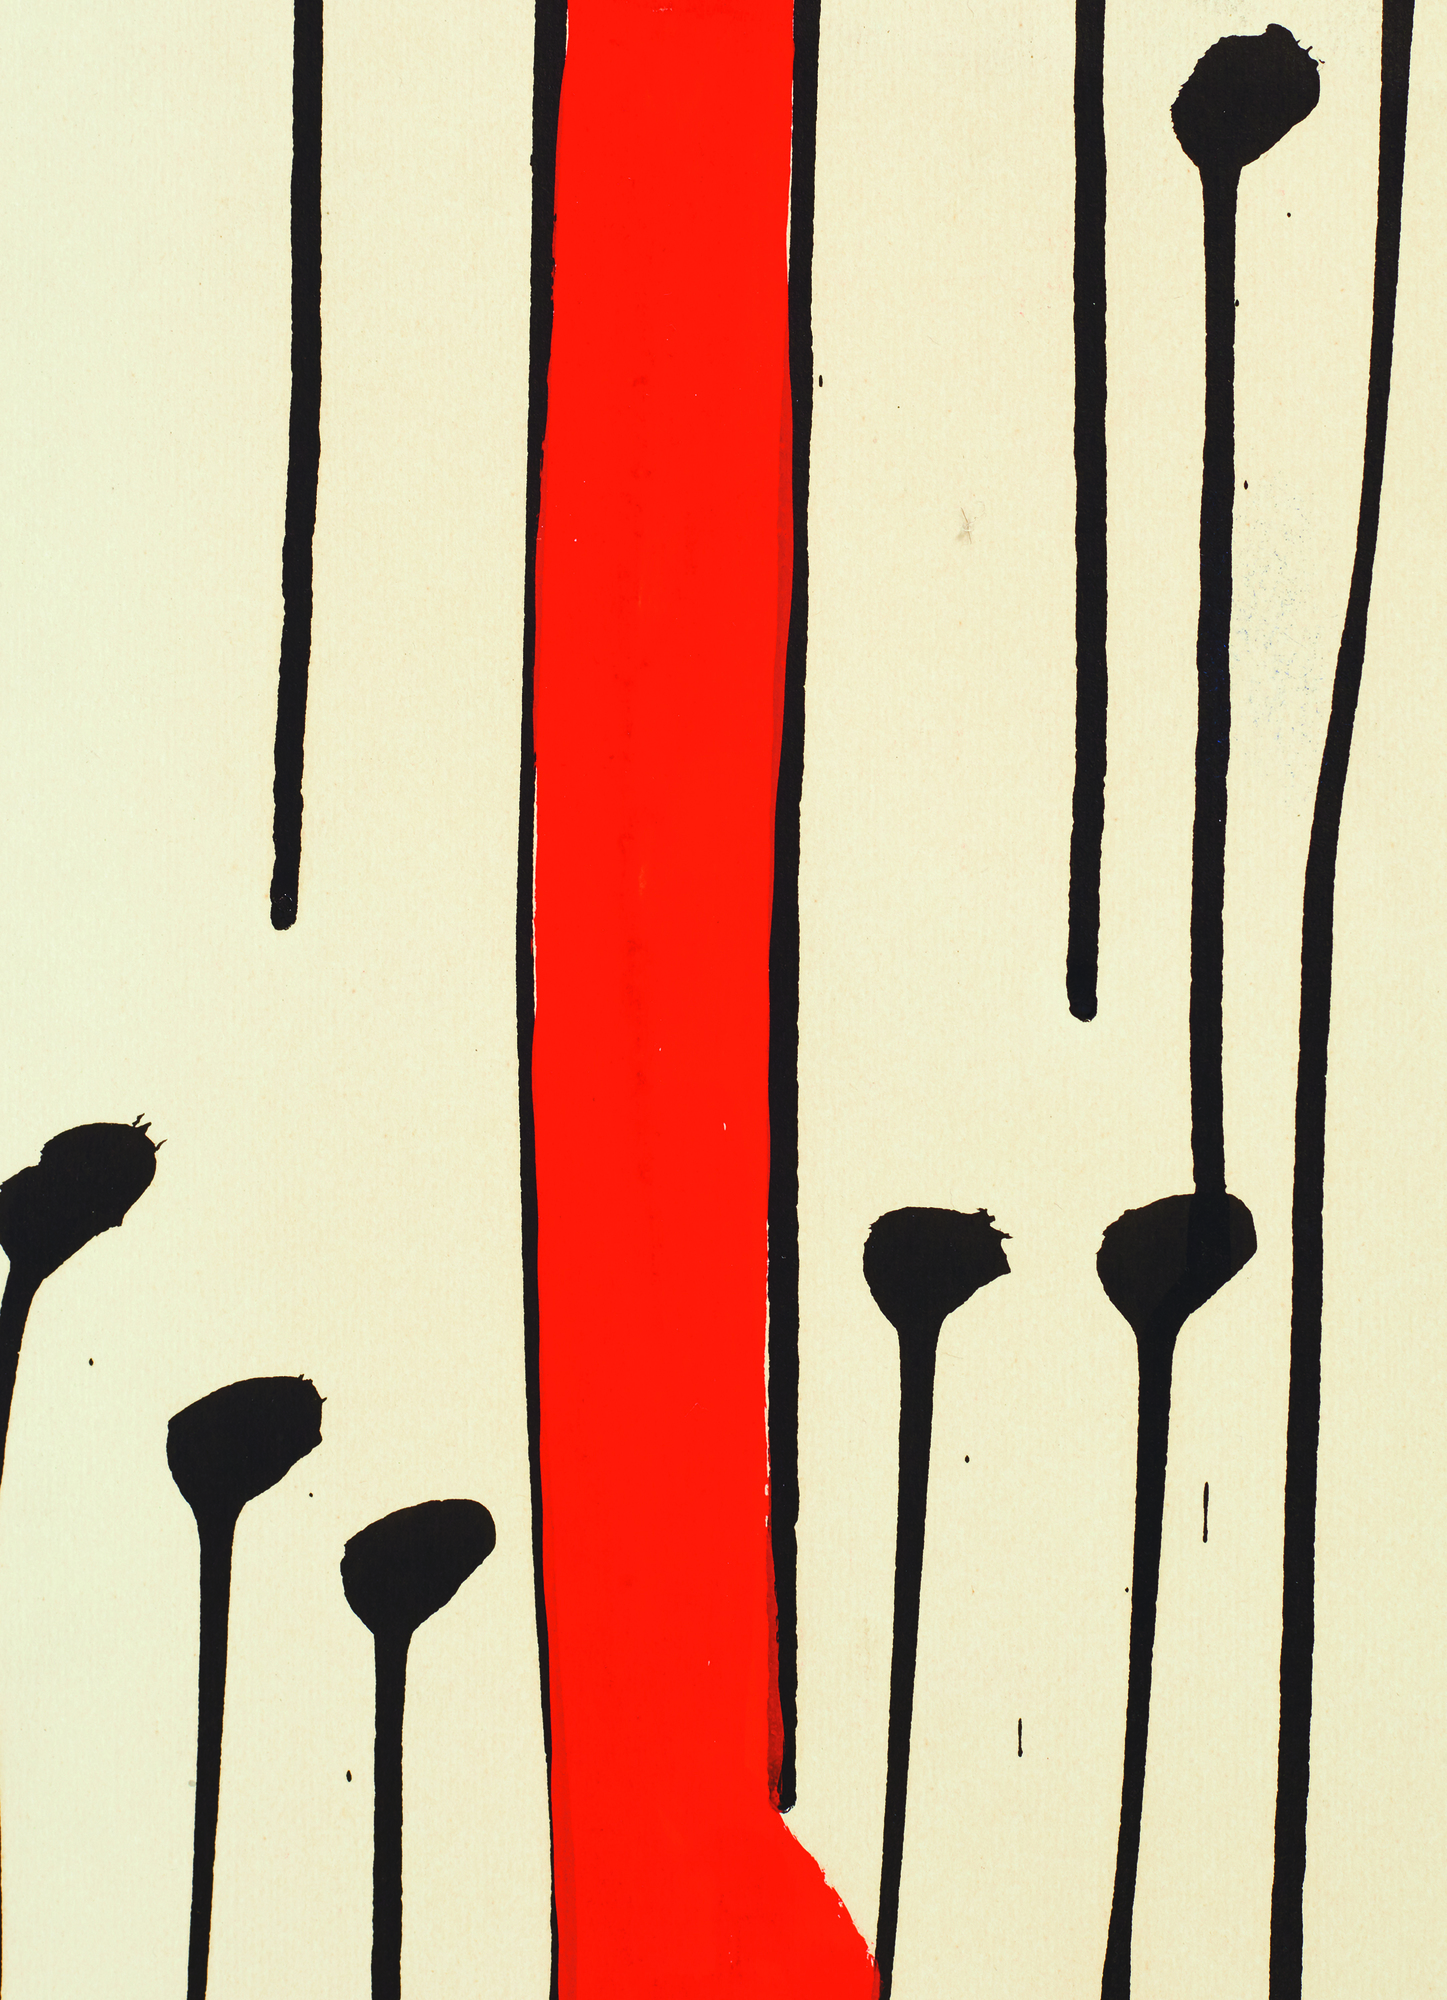 ALEXANDER CALDER - The Forest - gouache and ink on paper - 43 x 29 1/4 in.